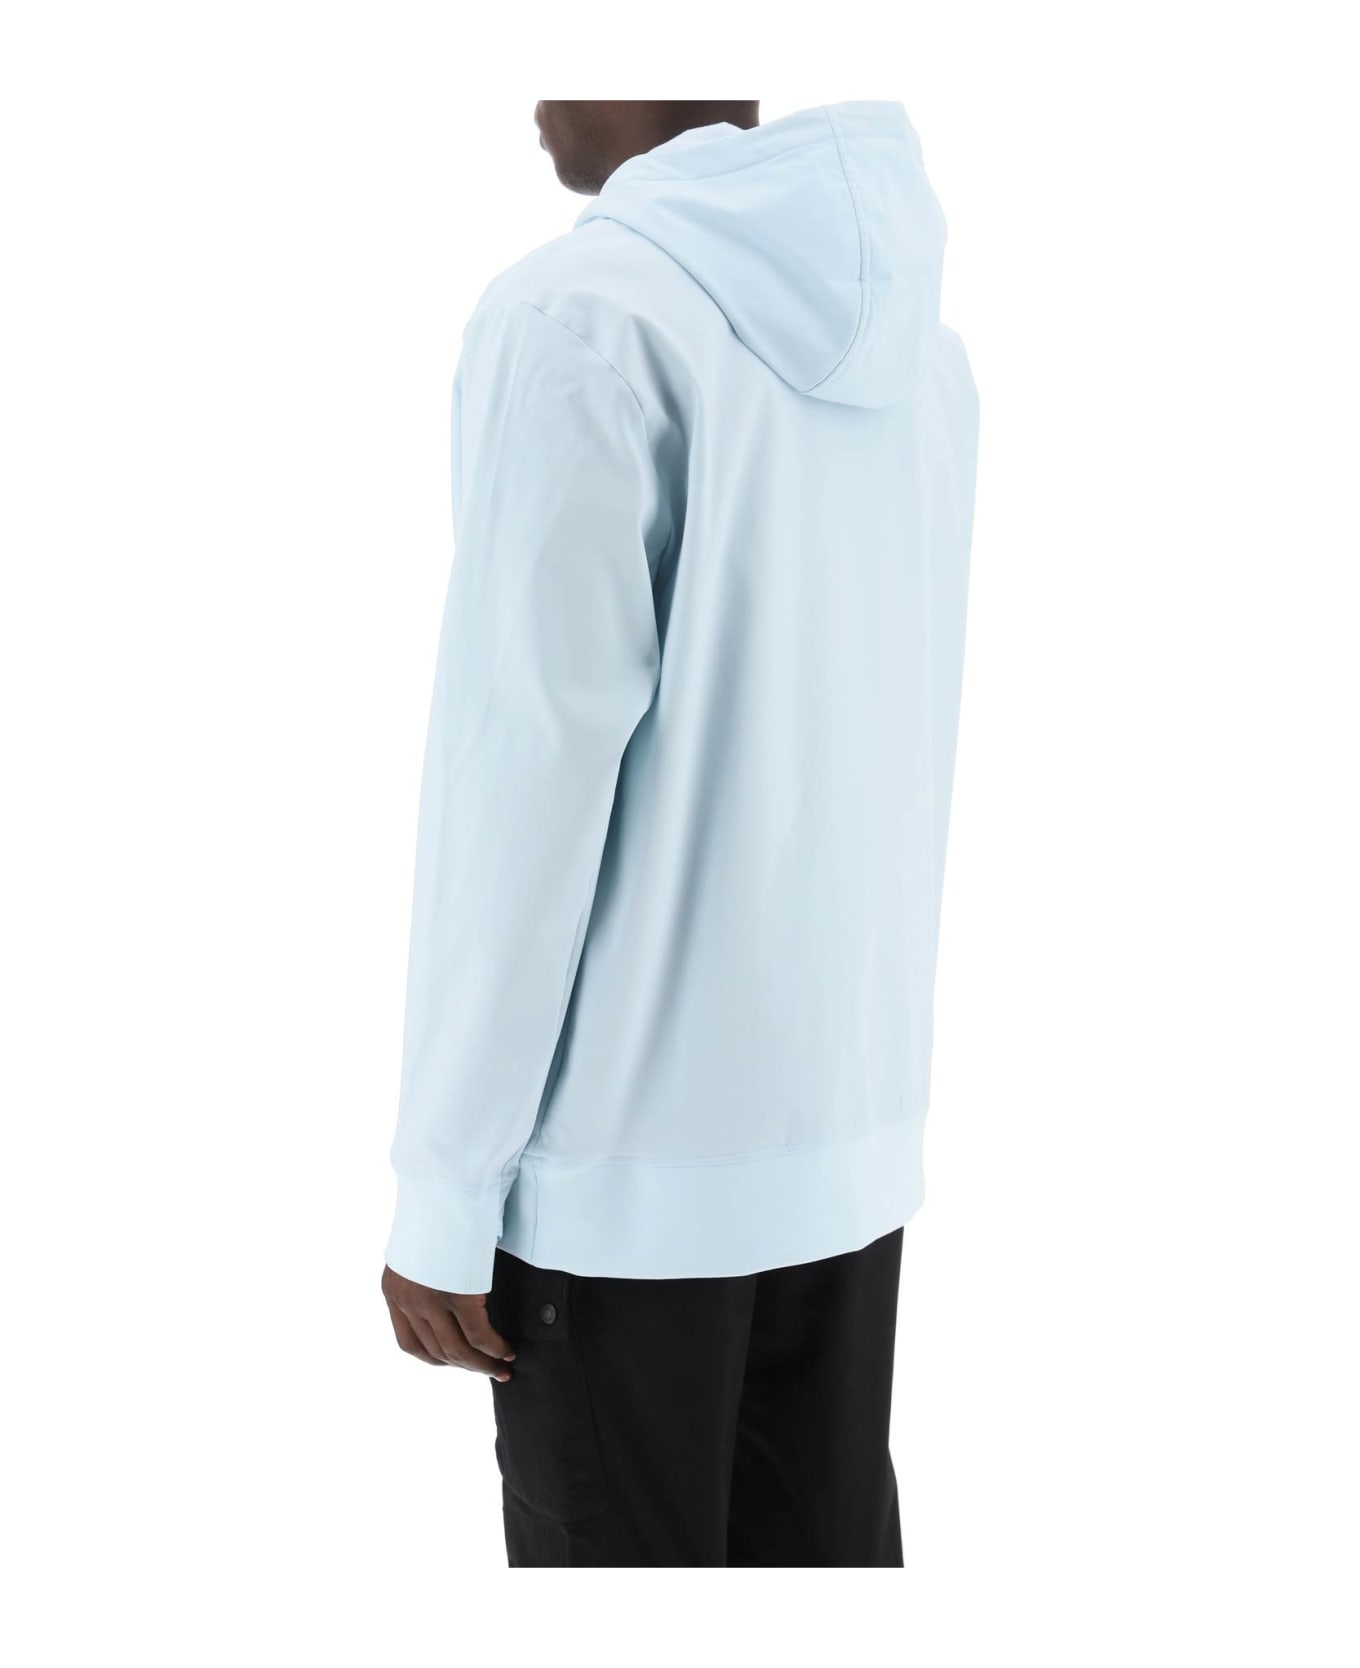 The North Face Techno Hoodie With Logo Print - ICECAP BLUE (Light blue)